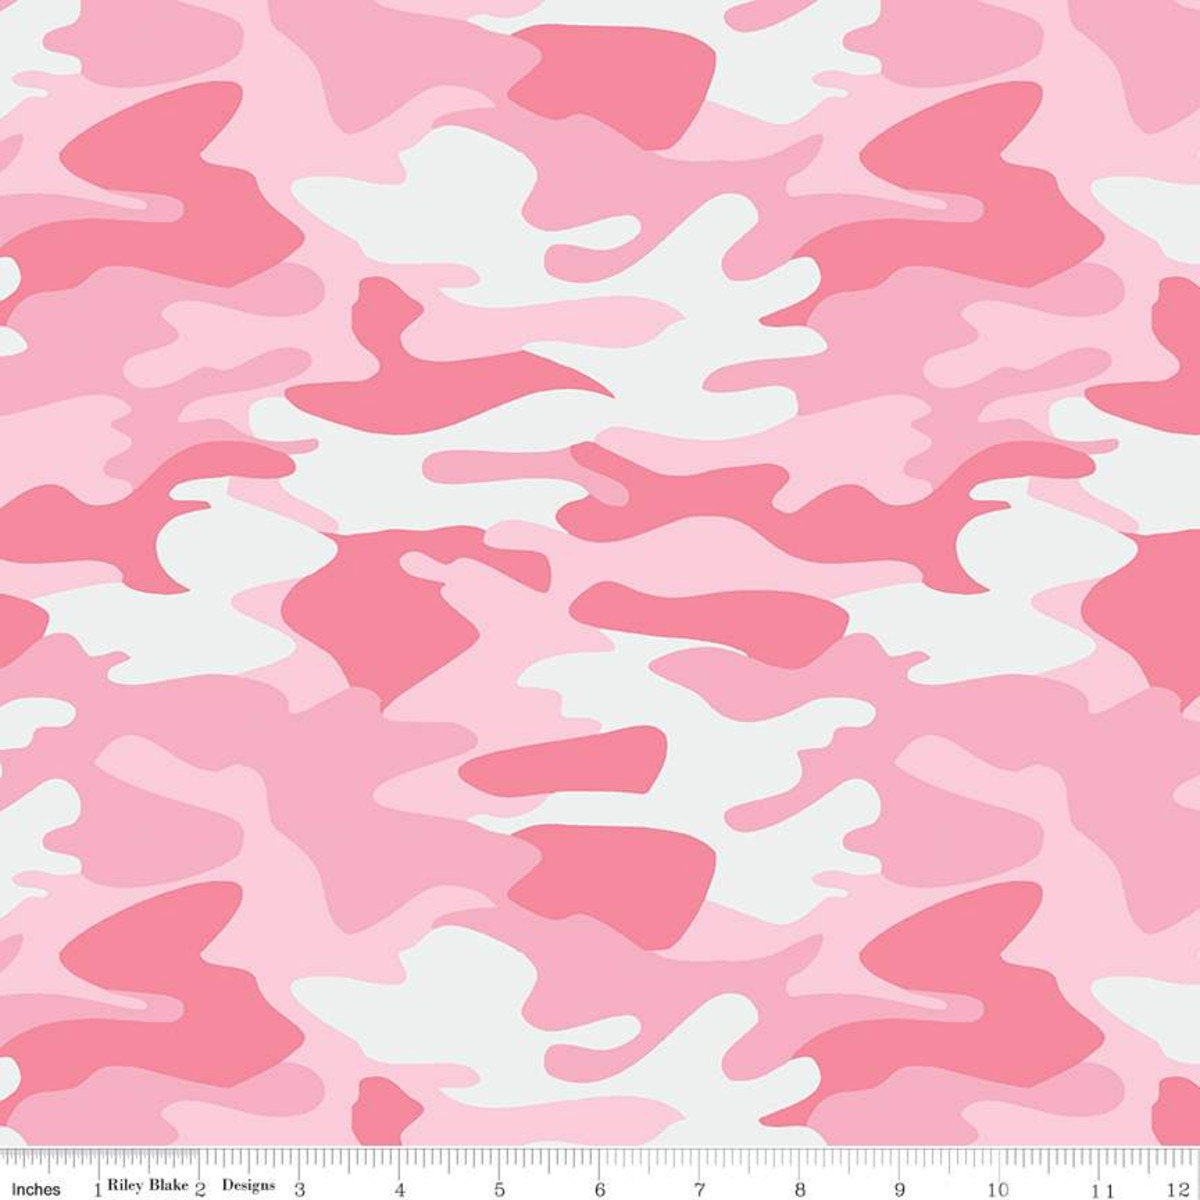 pink camo cotton fabric, Riley Blake Nobody Fights Alone Camo hot pink,  cotton quilting, camouflage, by the yard mask making fabric quality